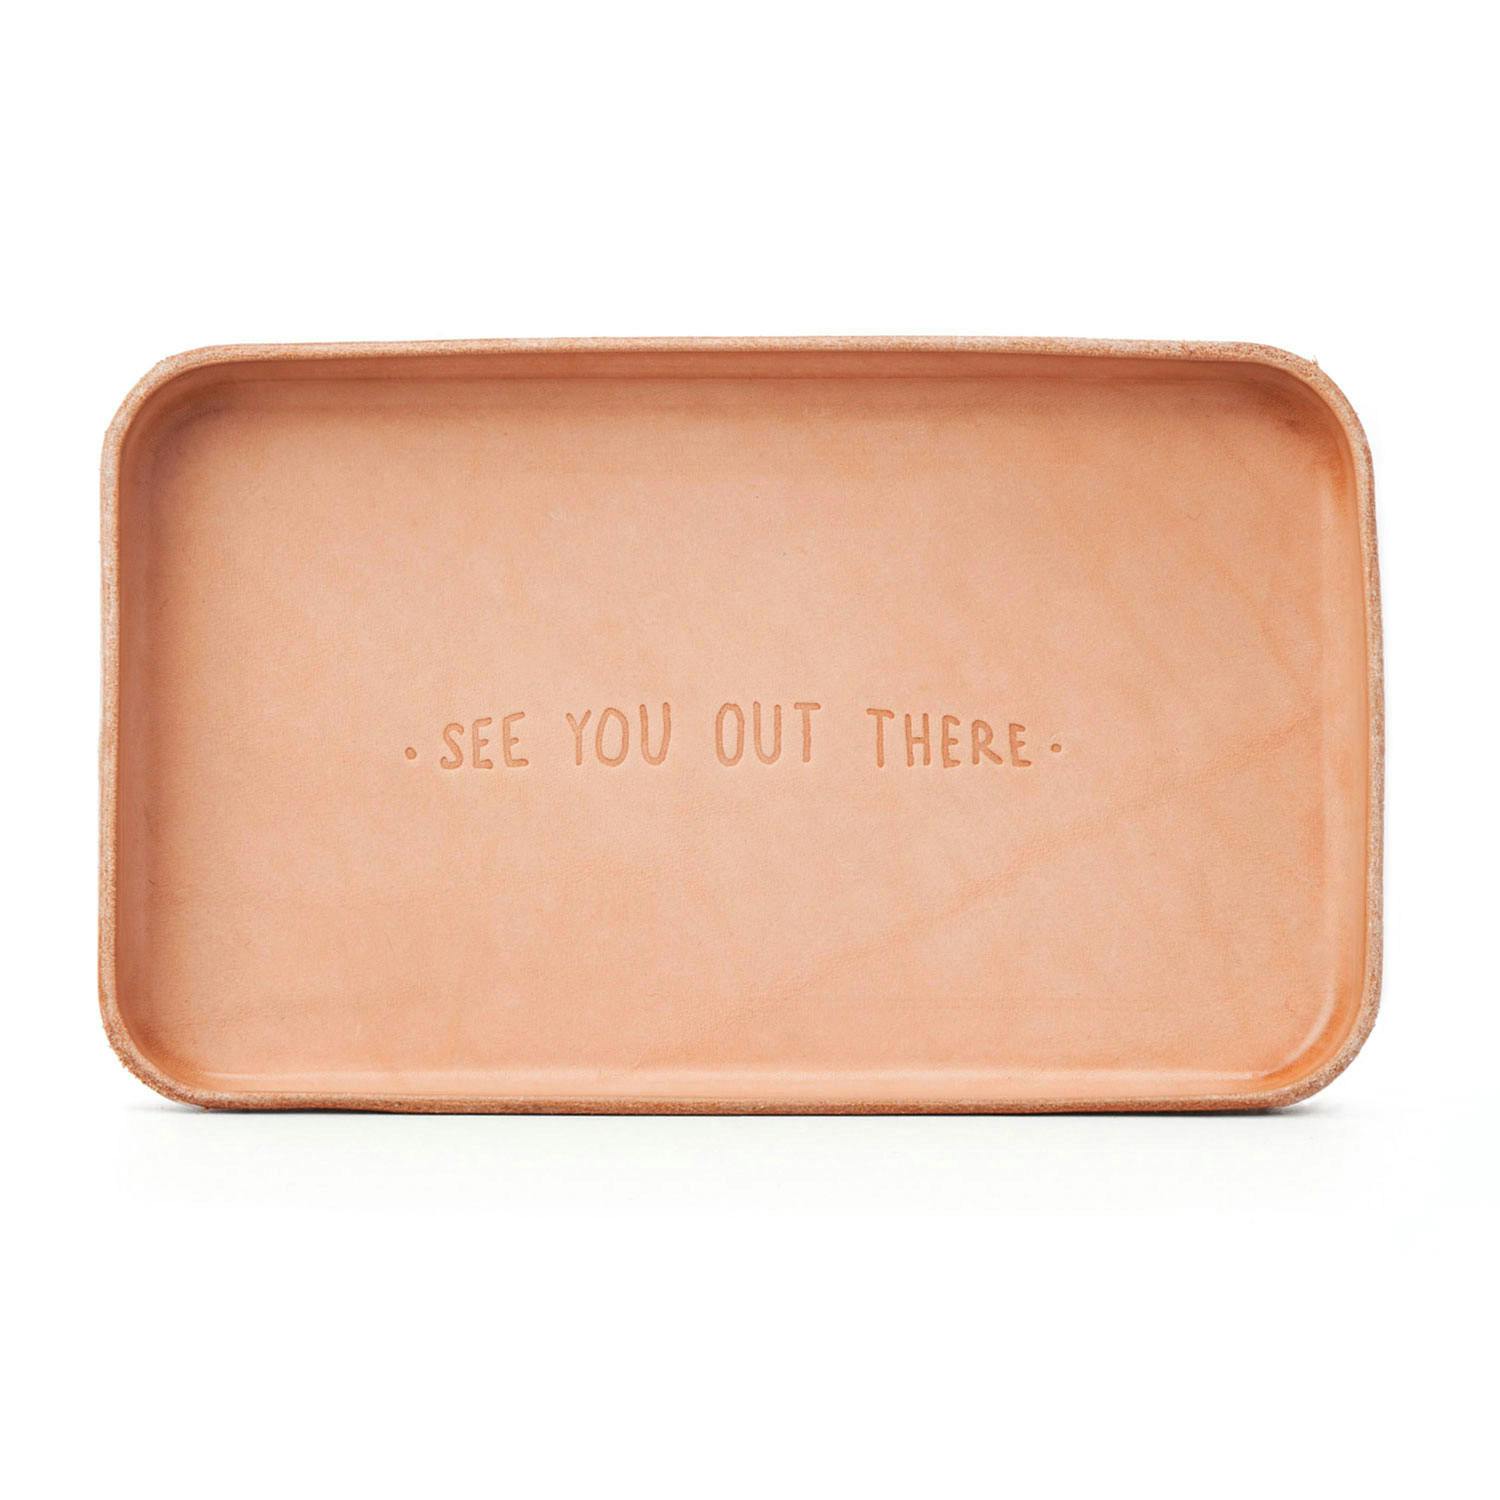 Billykirk "See you Out There" Leather Valet Tray